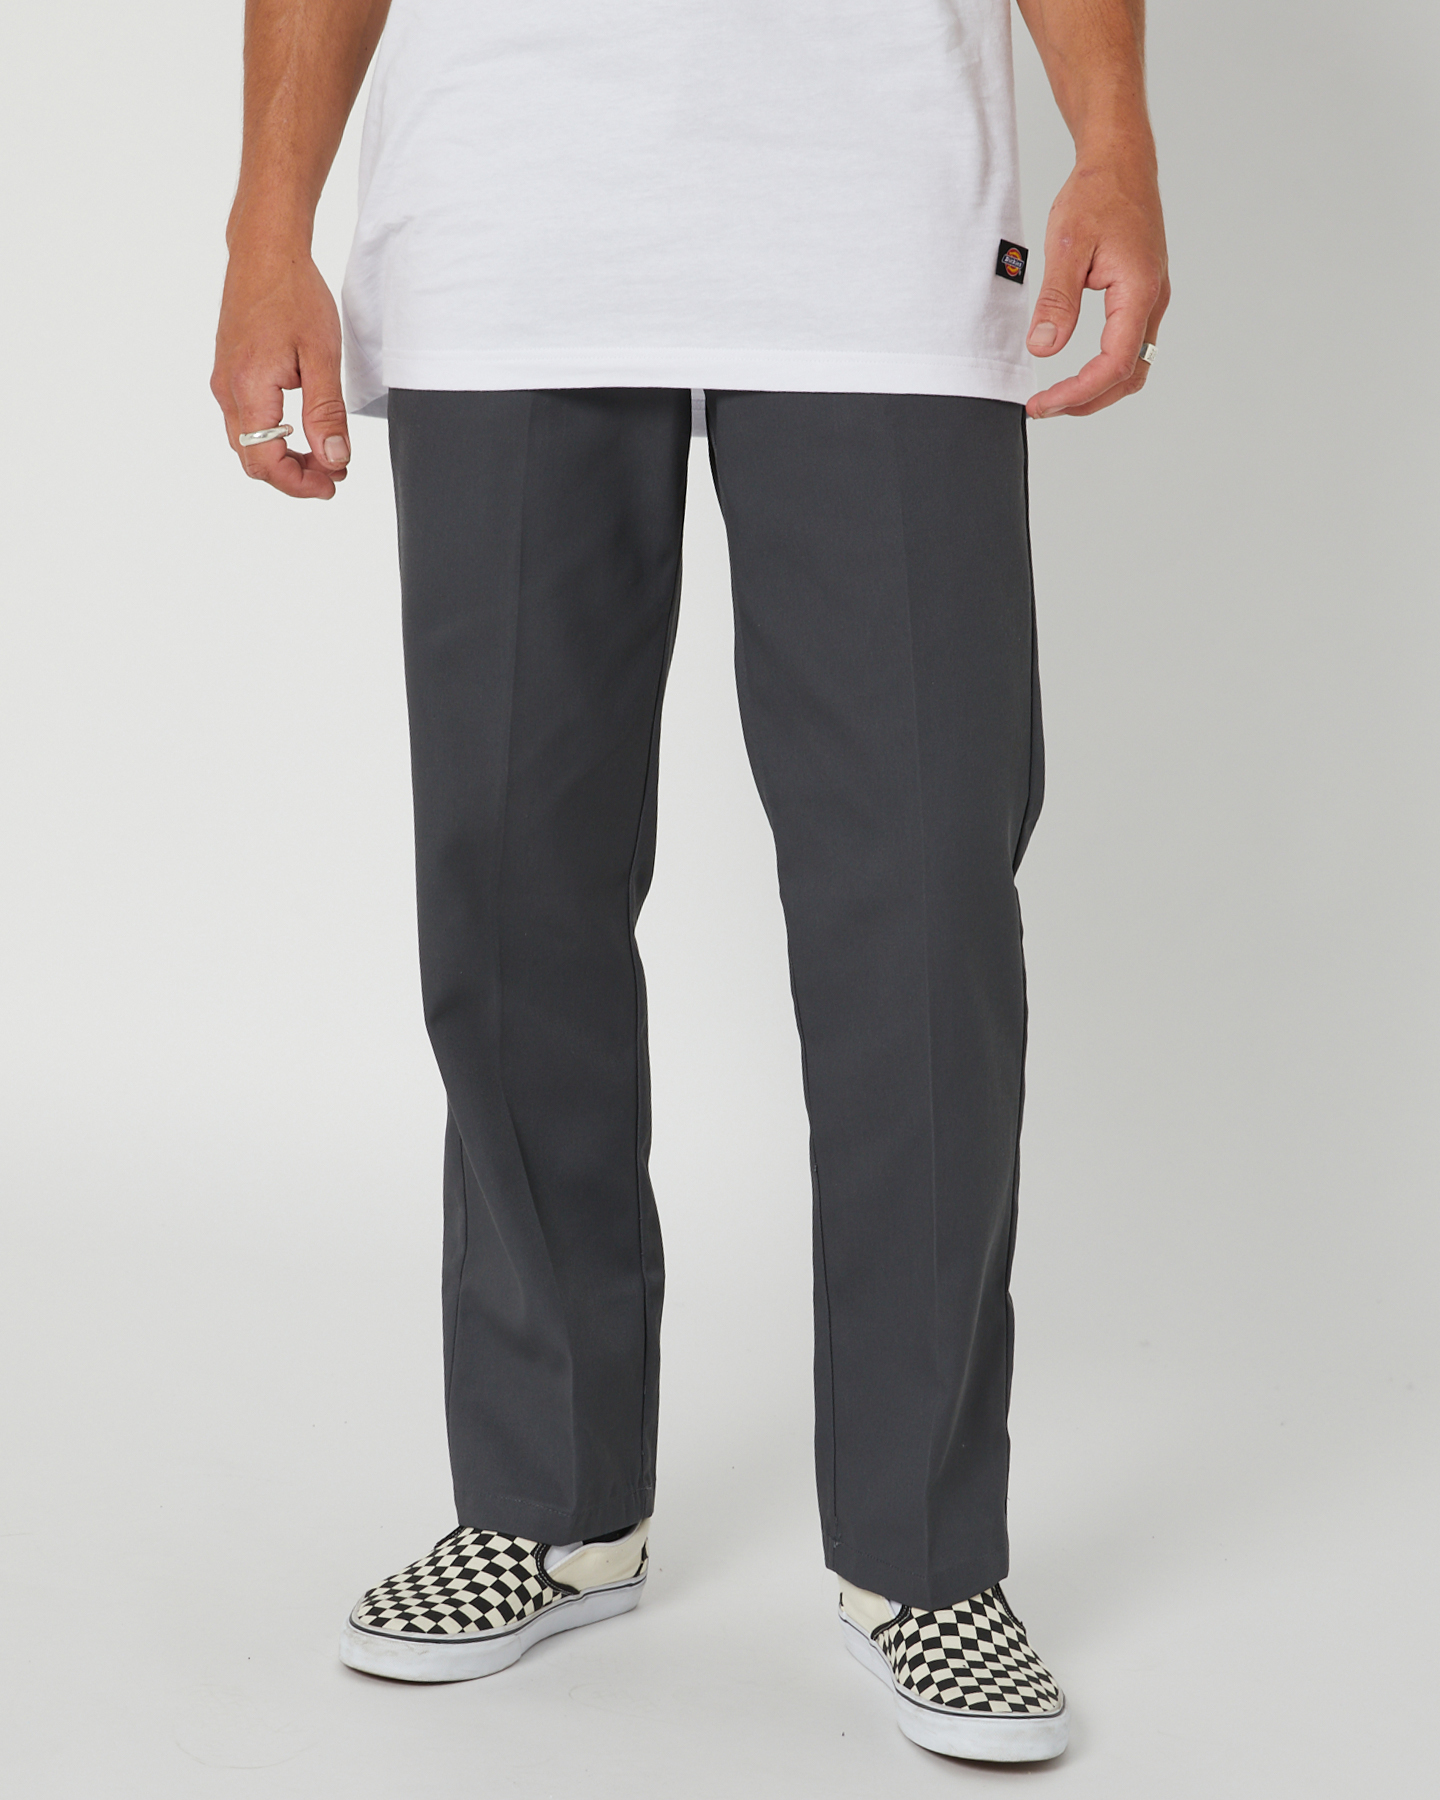 https://www.surfstitch.com/on/demandware.static/-/Sites-ss-master-catalog/default/dwf9c23770/images/WP873CH/CHARCOAL-MENS-CLOTHING-DICKIES-PANTS-WP873CH_1.JPG